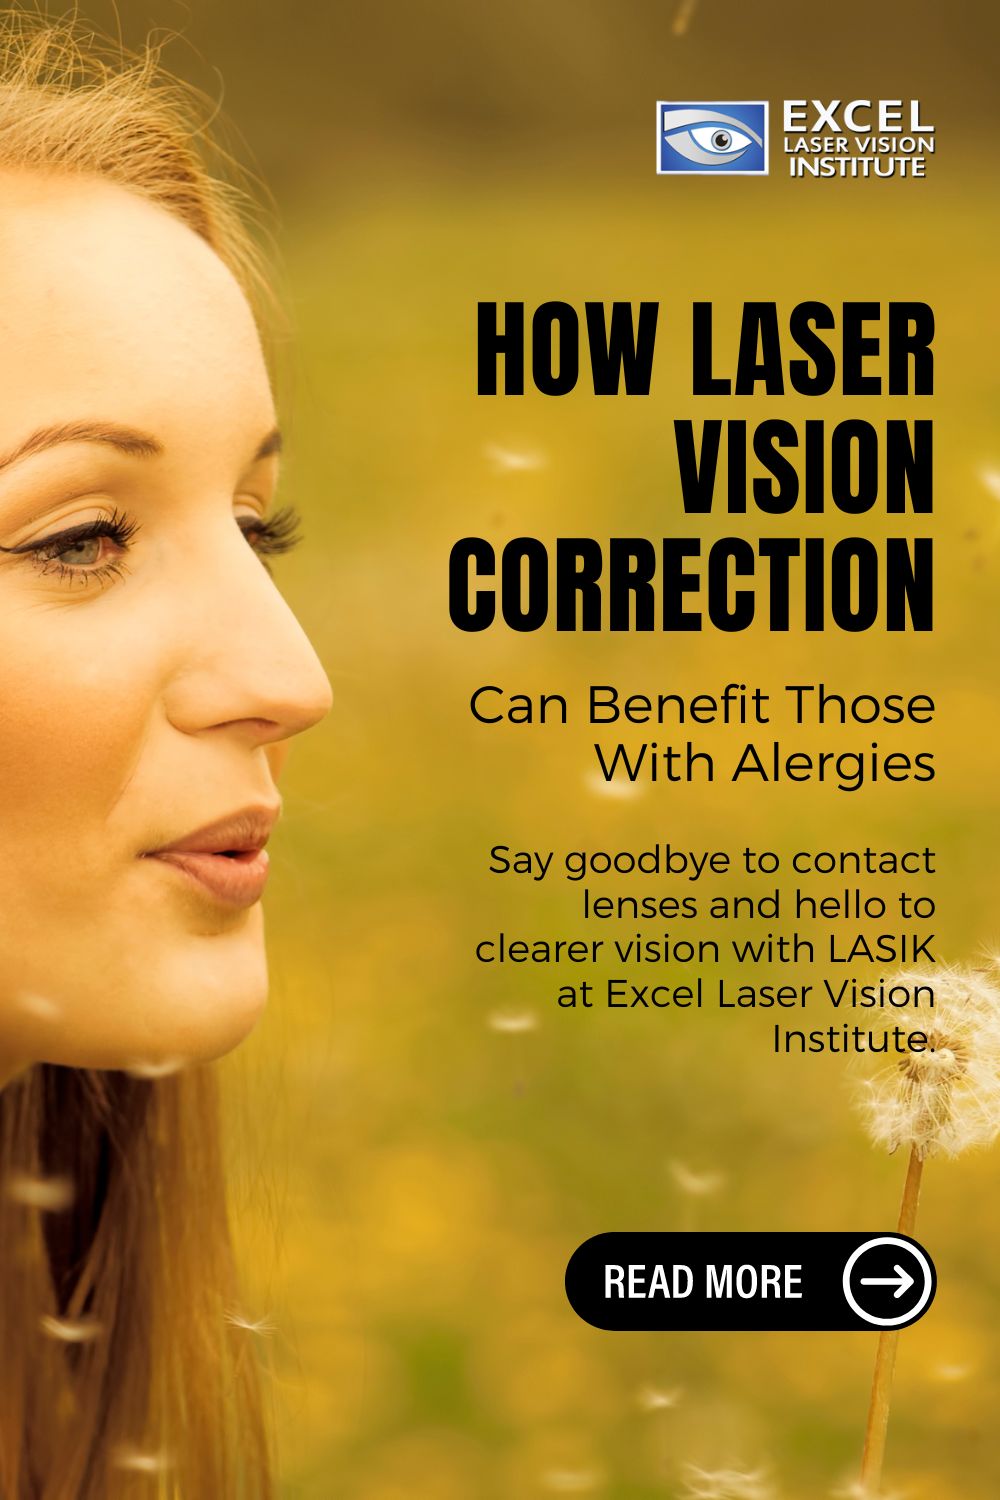 woman-blowing-dandelion-blog-title-How-laser-vision-correction-Can-Benefit-Those-With-Alergies-Pinterest-Pin